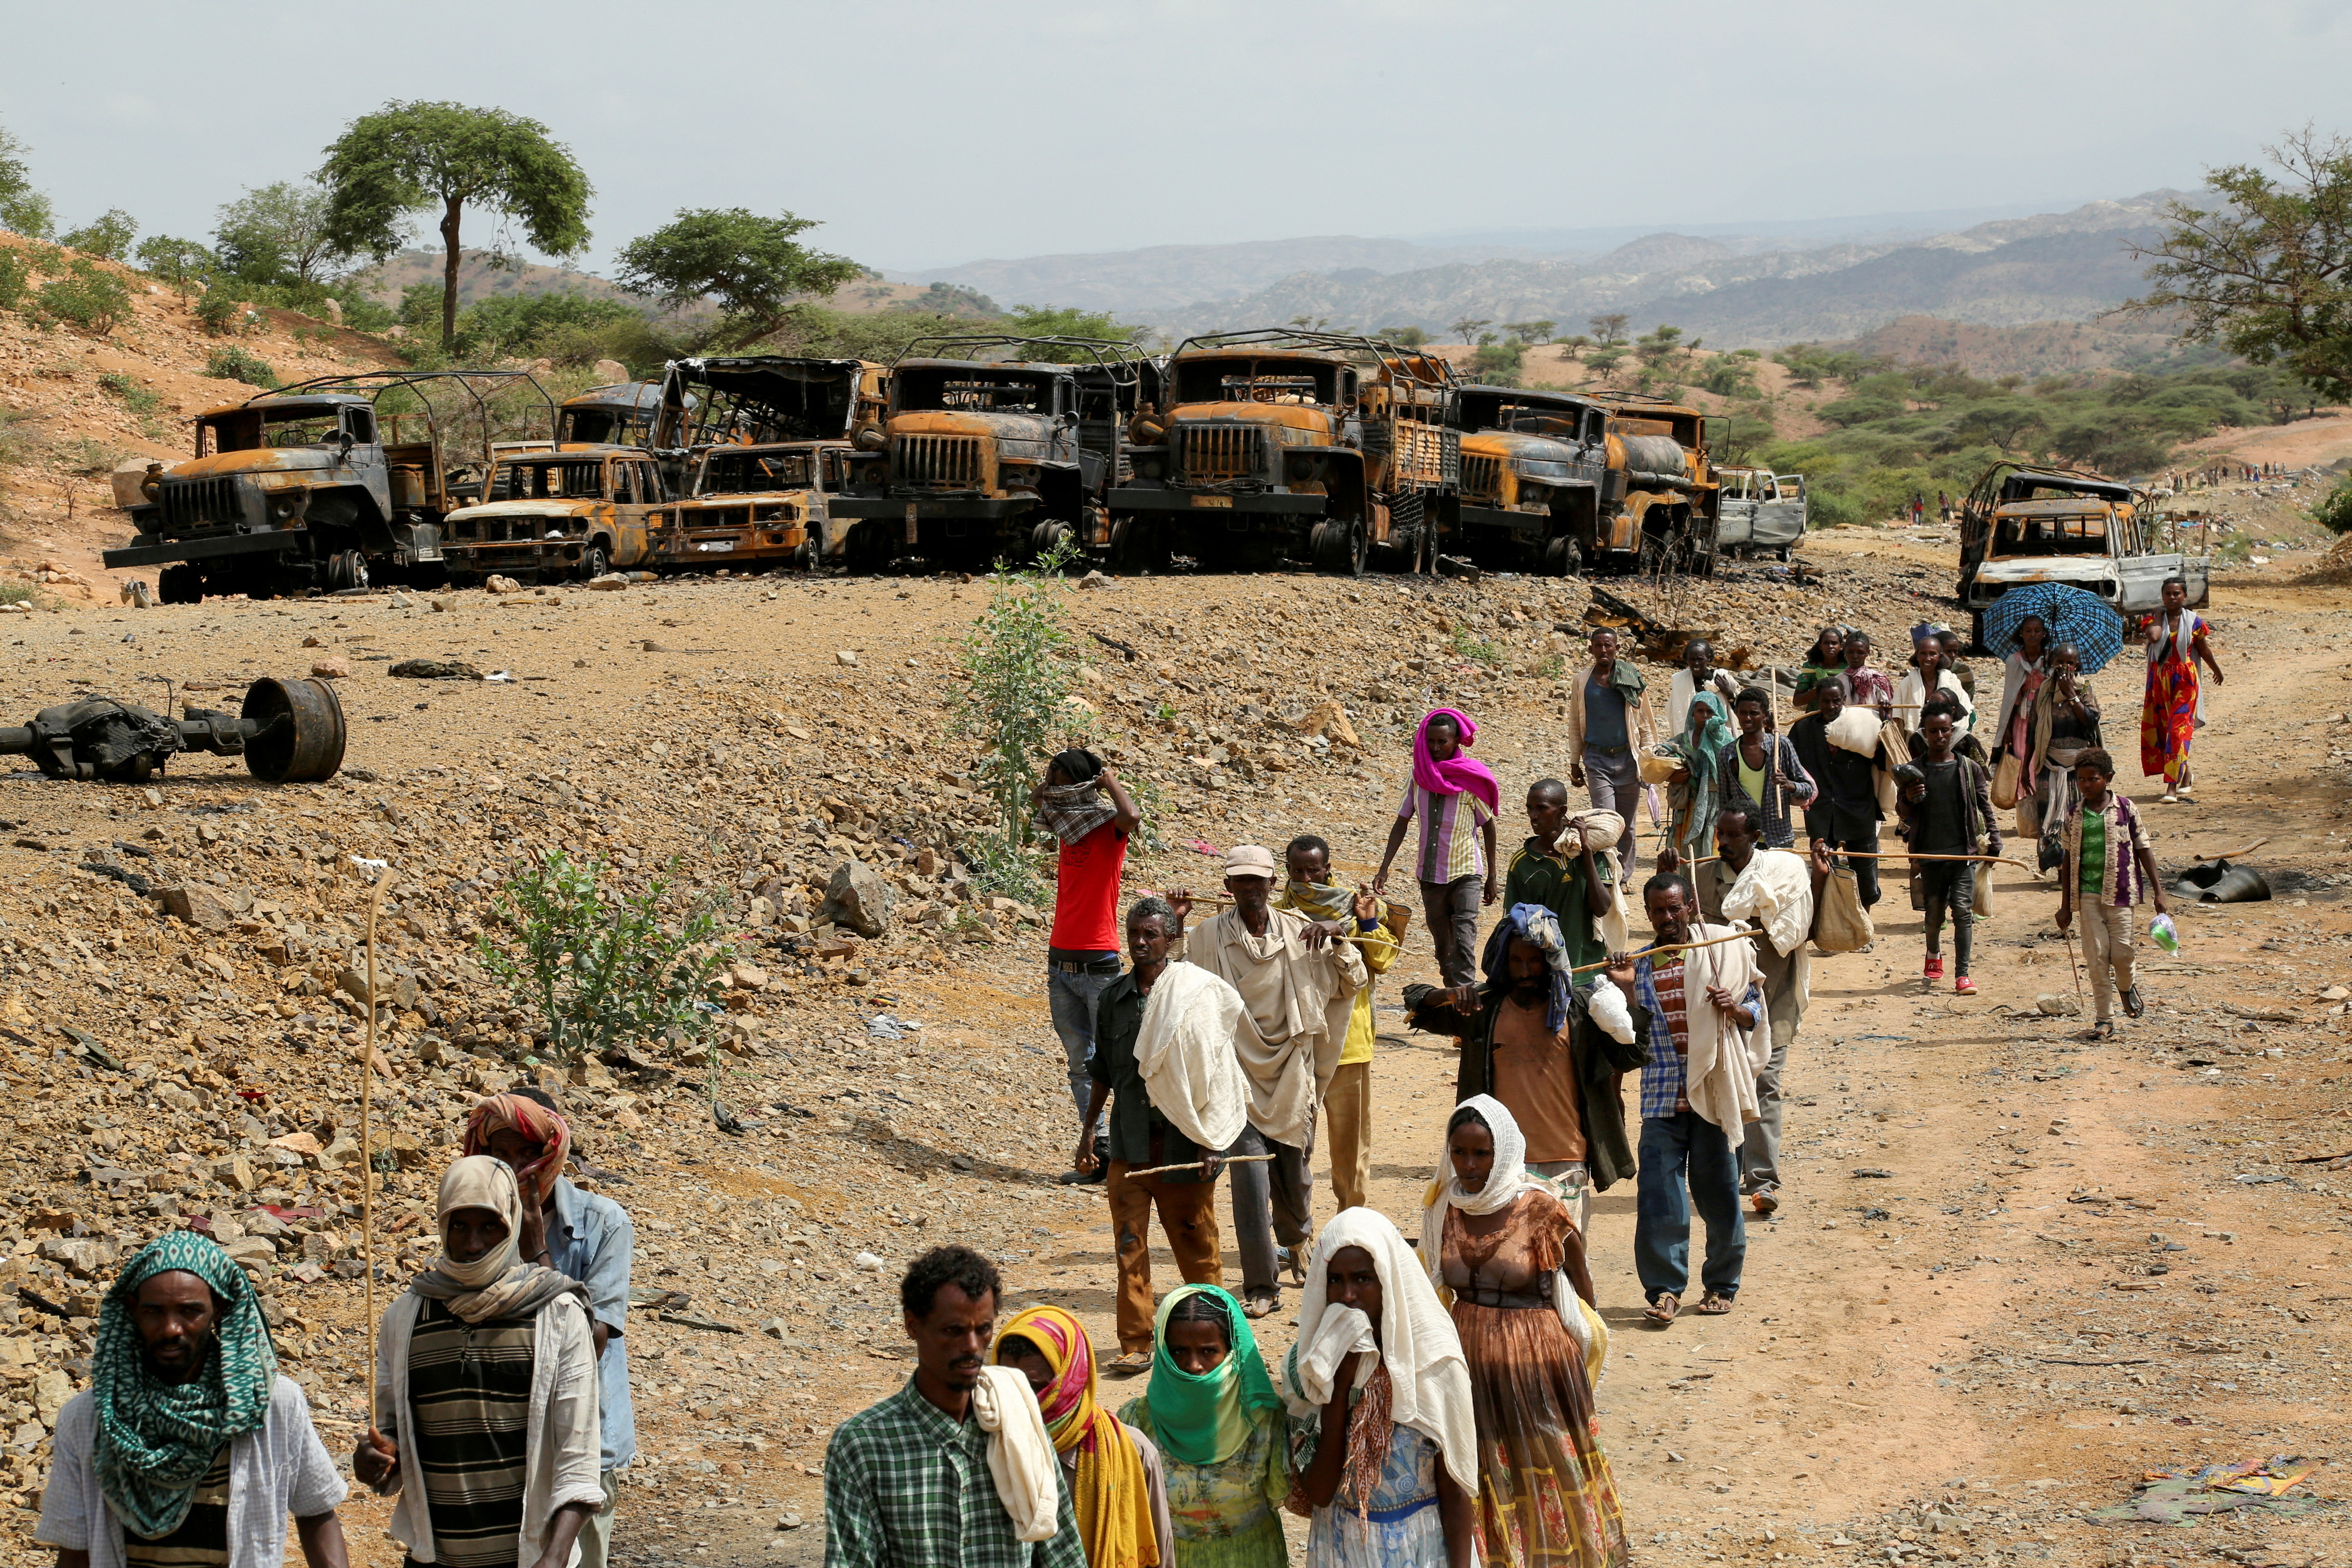  Villagers return from a market to Yechila town in south central Tigray walking past scores of burned vehicles, in Tigray, Ethiopia, July 10, 2021. REUTERS/Giulia Paravicini/File Photo